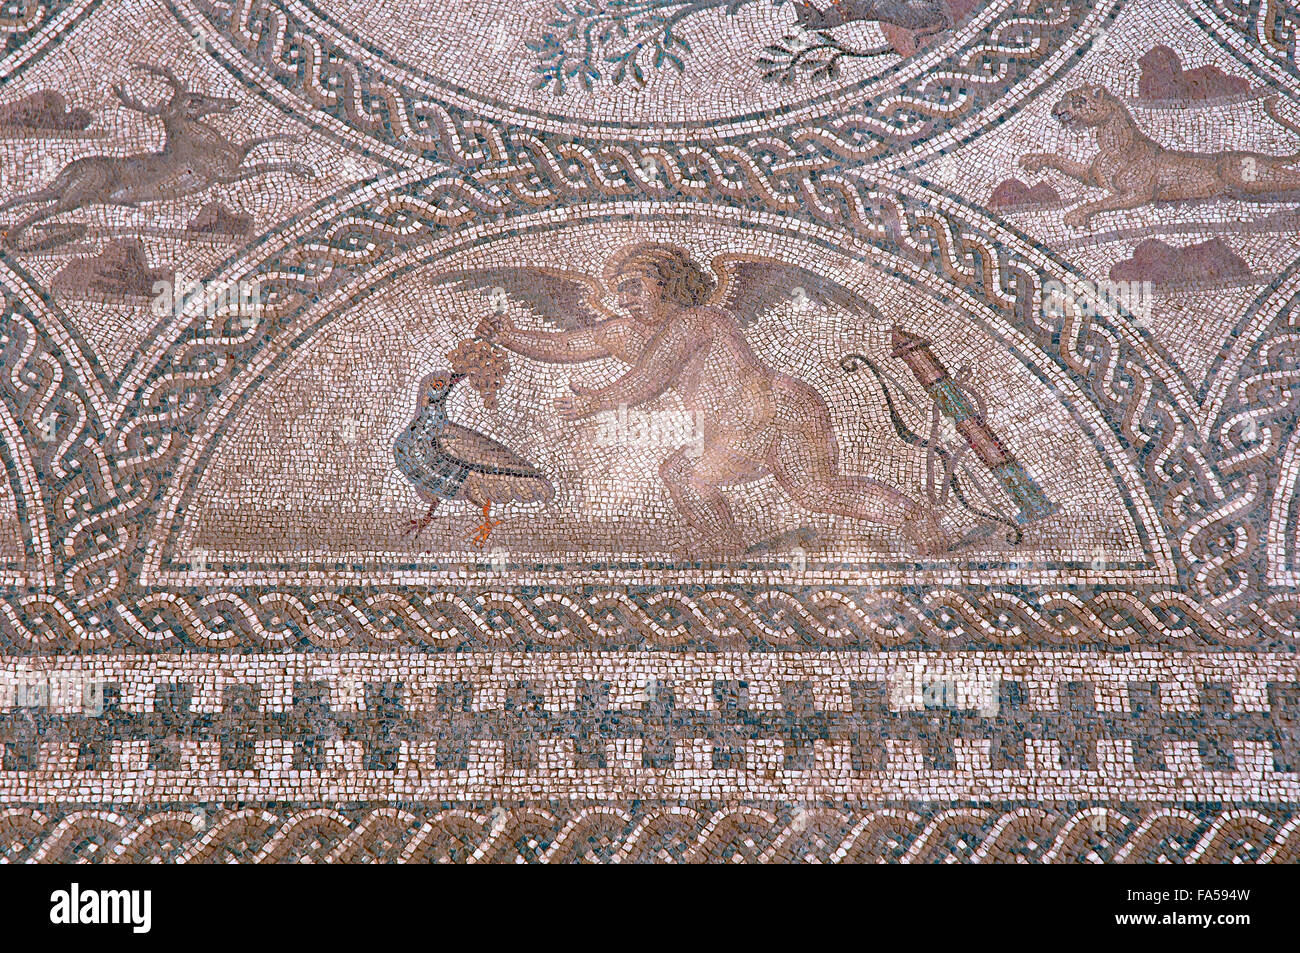 Roman Iberian city of Castulo, Mosaic of the loves - detail, Linares, Jaen province, Region of Andalusia, Spain, Europe Stock Photo